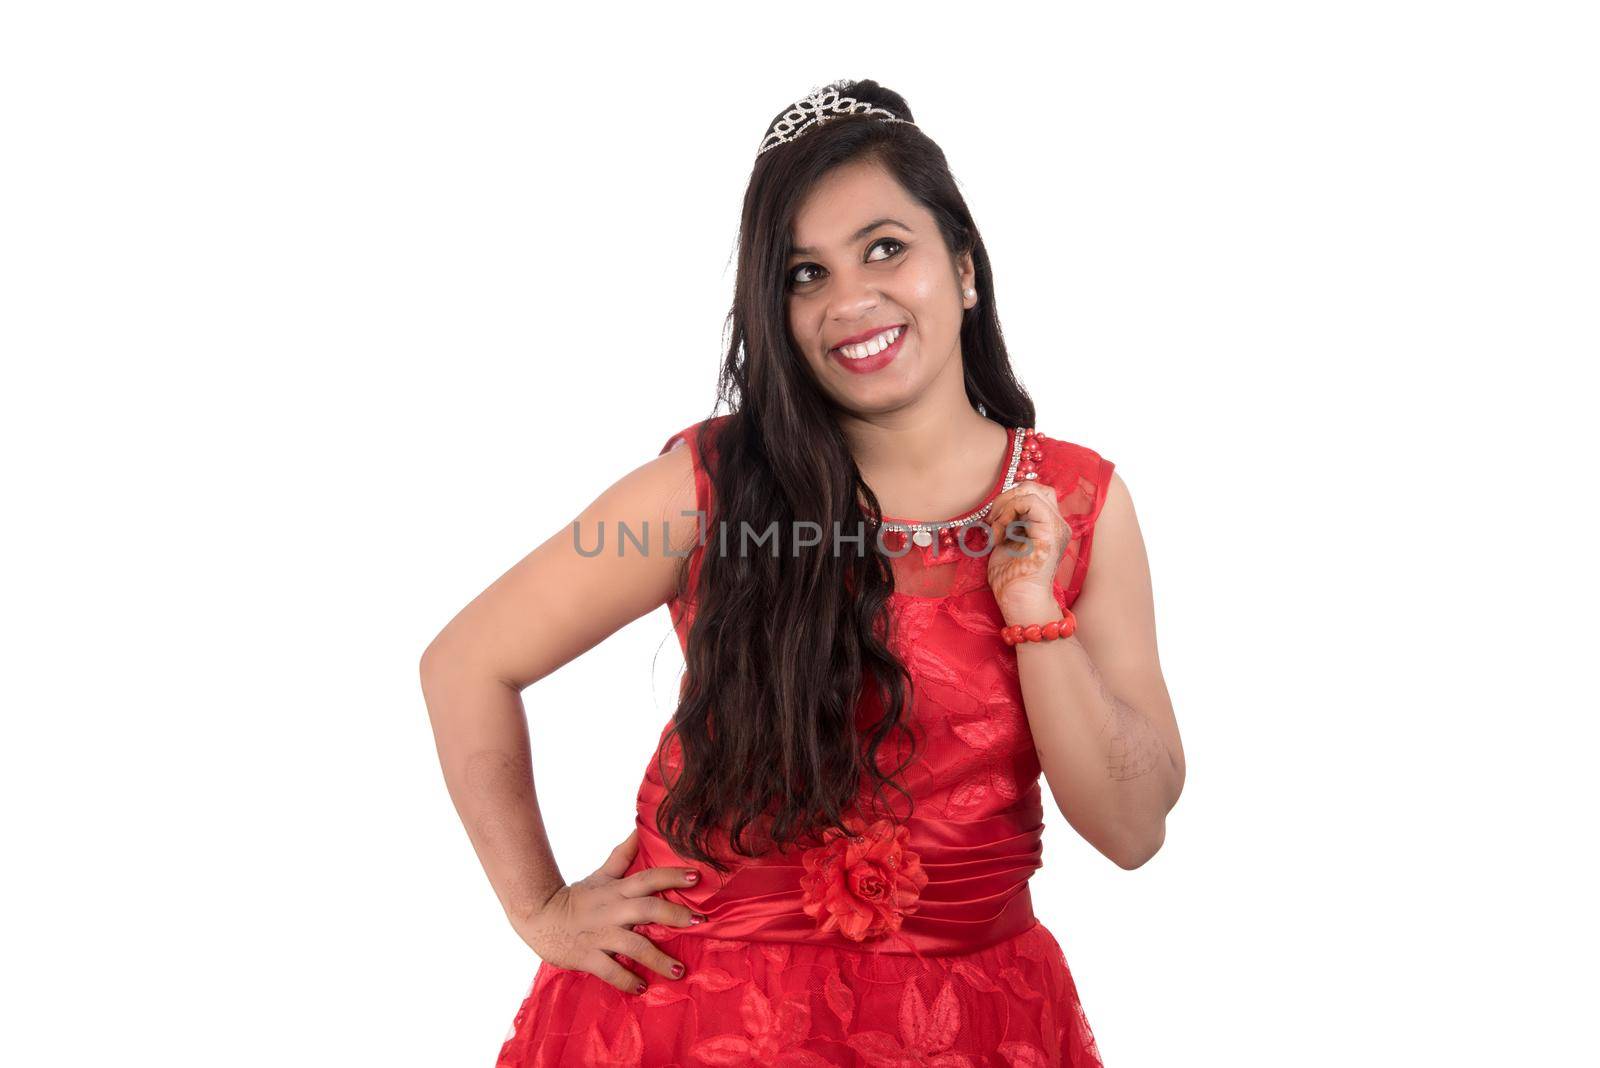 Young girl in red dress posing on white background